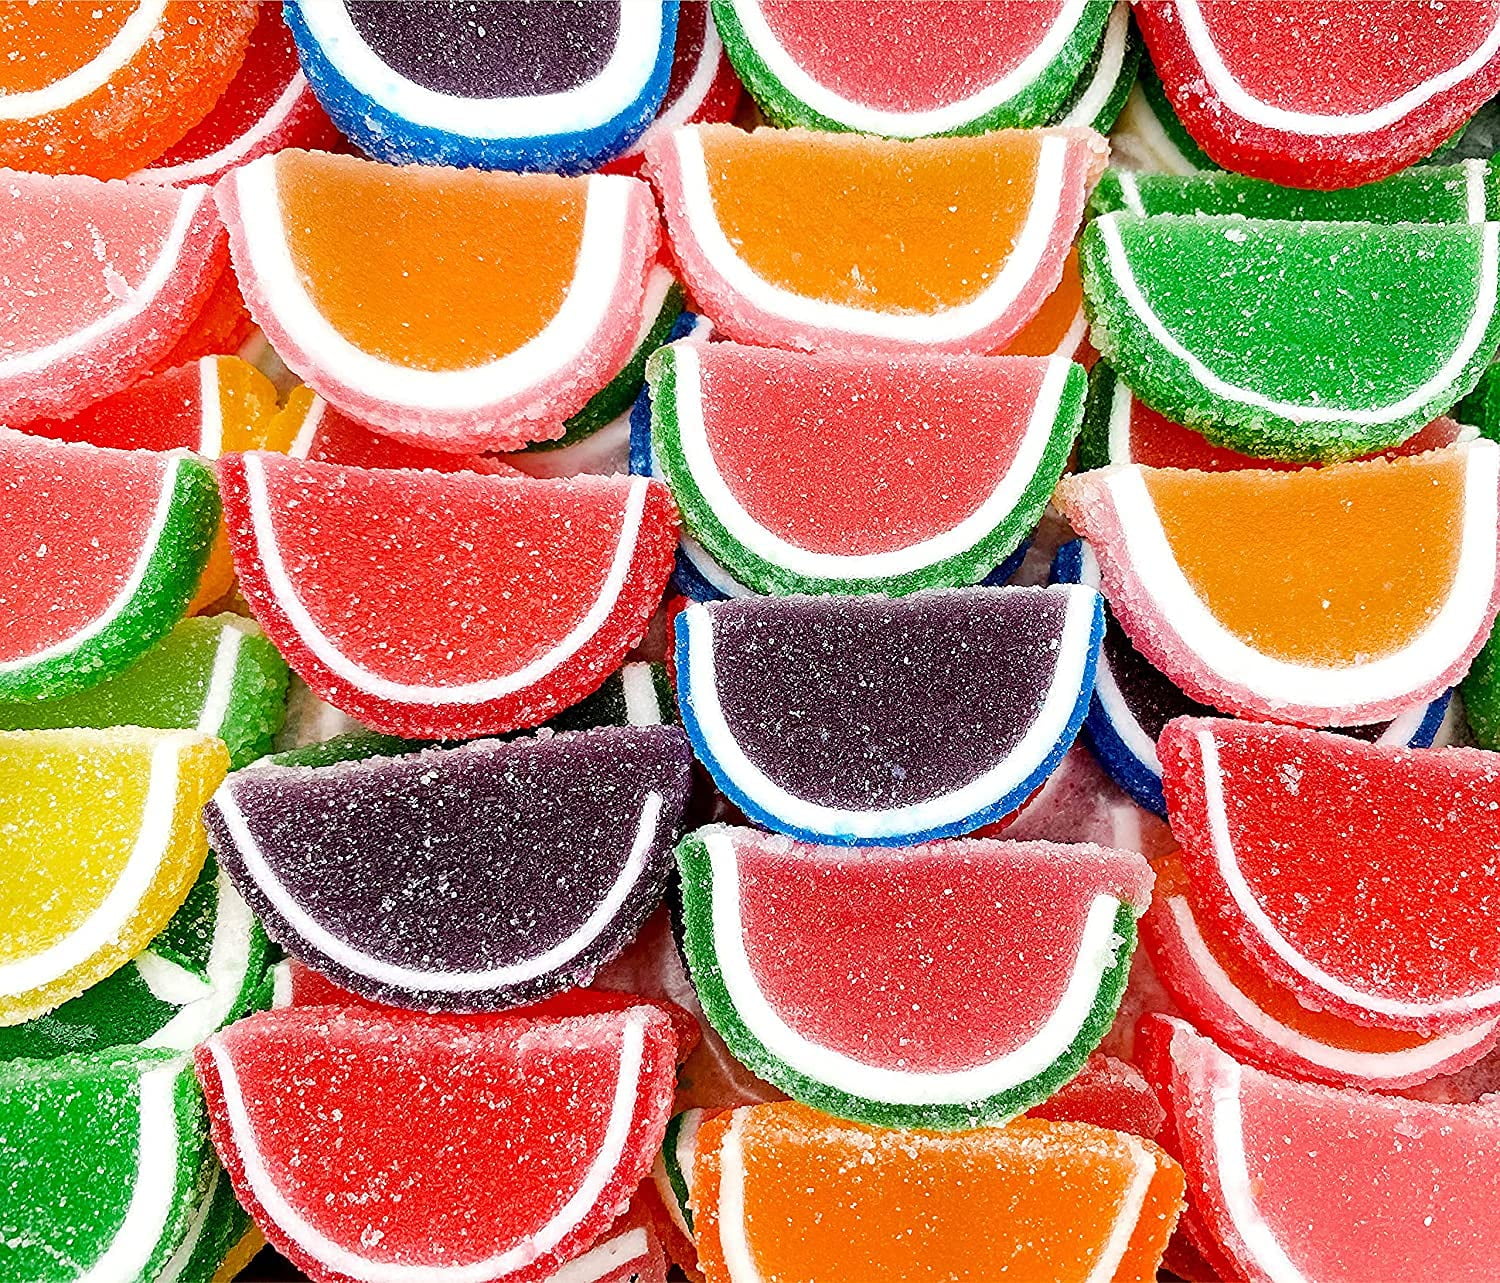  Original Jelly Fruit Slices Sugar-Free, Gummi Sweet Confection  Candies, Traditional Old Fashioned, Vegan, Gluten-Free, Kosher Certified  Parve (2 Pound) : Grocery & Gourmet Food